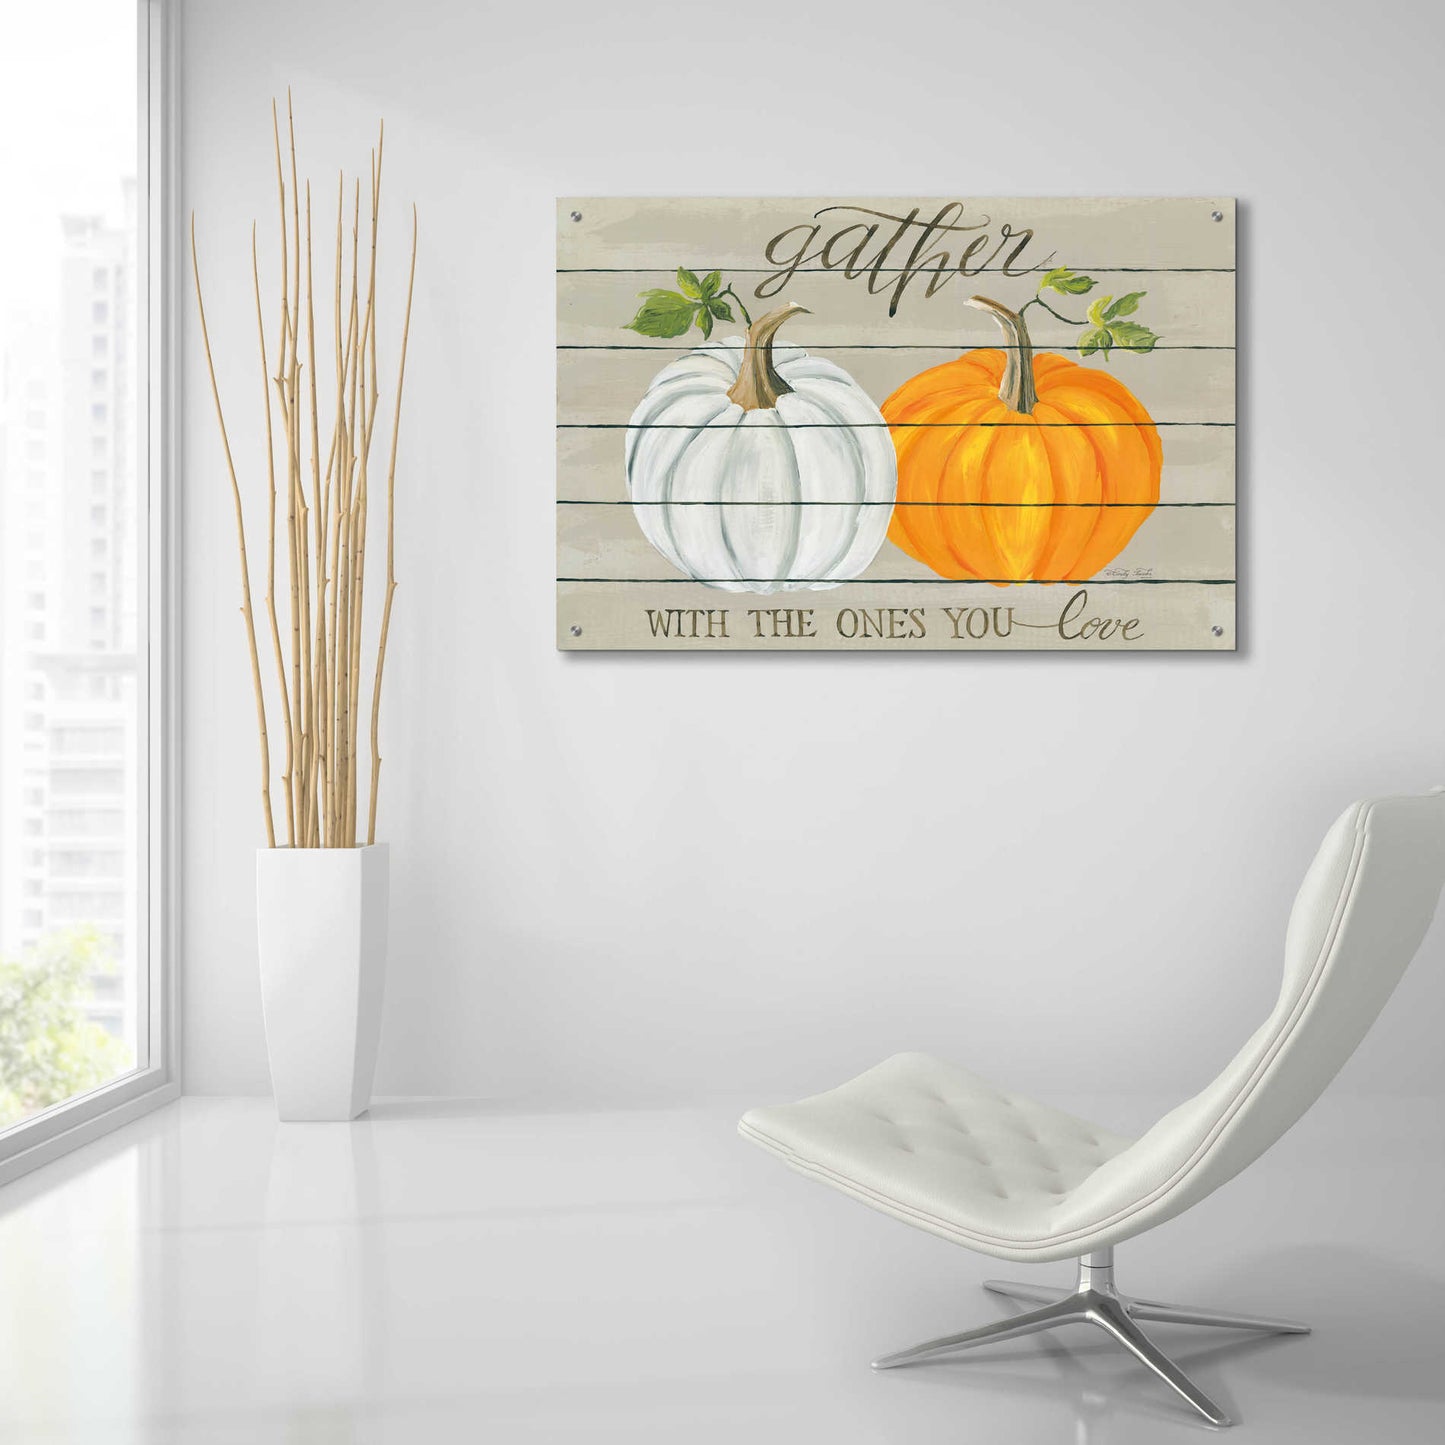 Epic Art 'Gather With The Ones You Love Pumpkins' by Cindy Jacobs, Acrylic Glass Wall Art,36x24